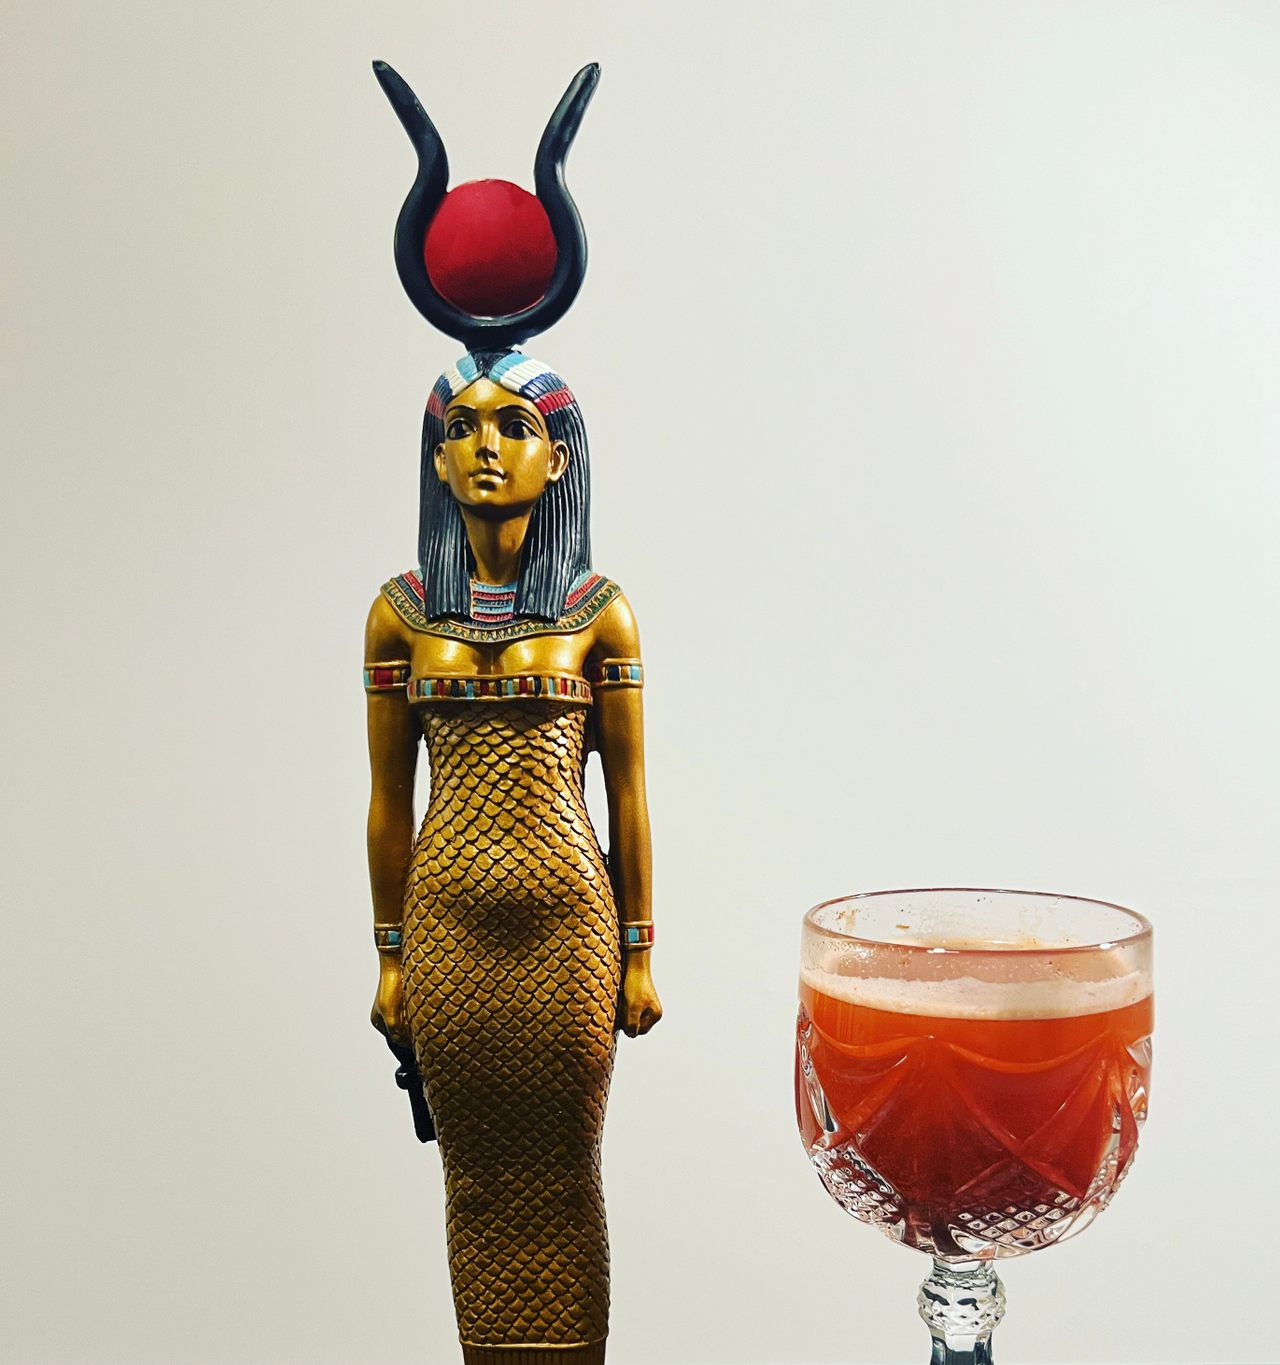 This red ochre-tinted beer was served in honor of the goddess Hathor.